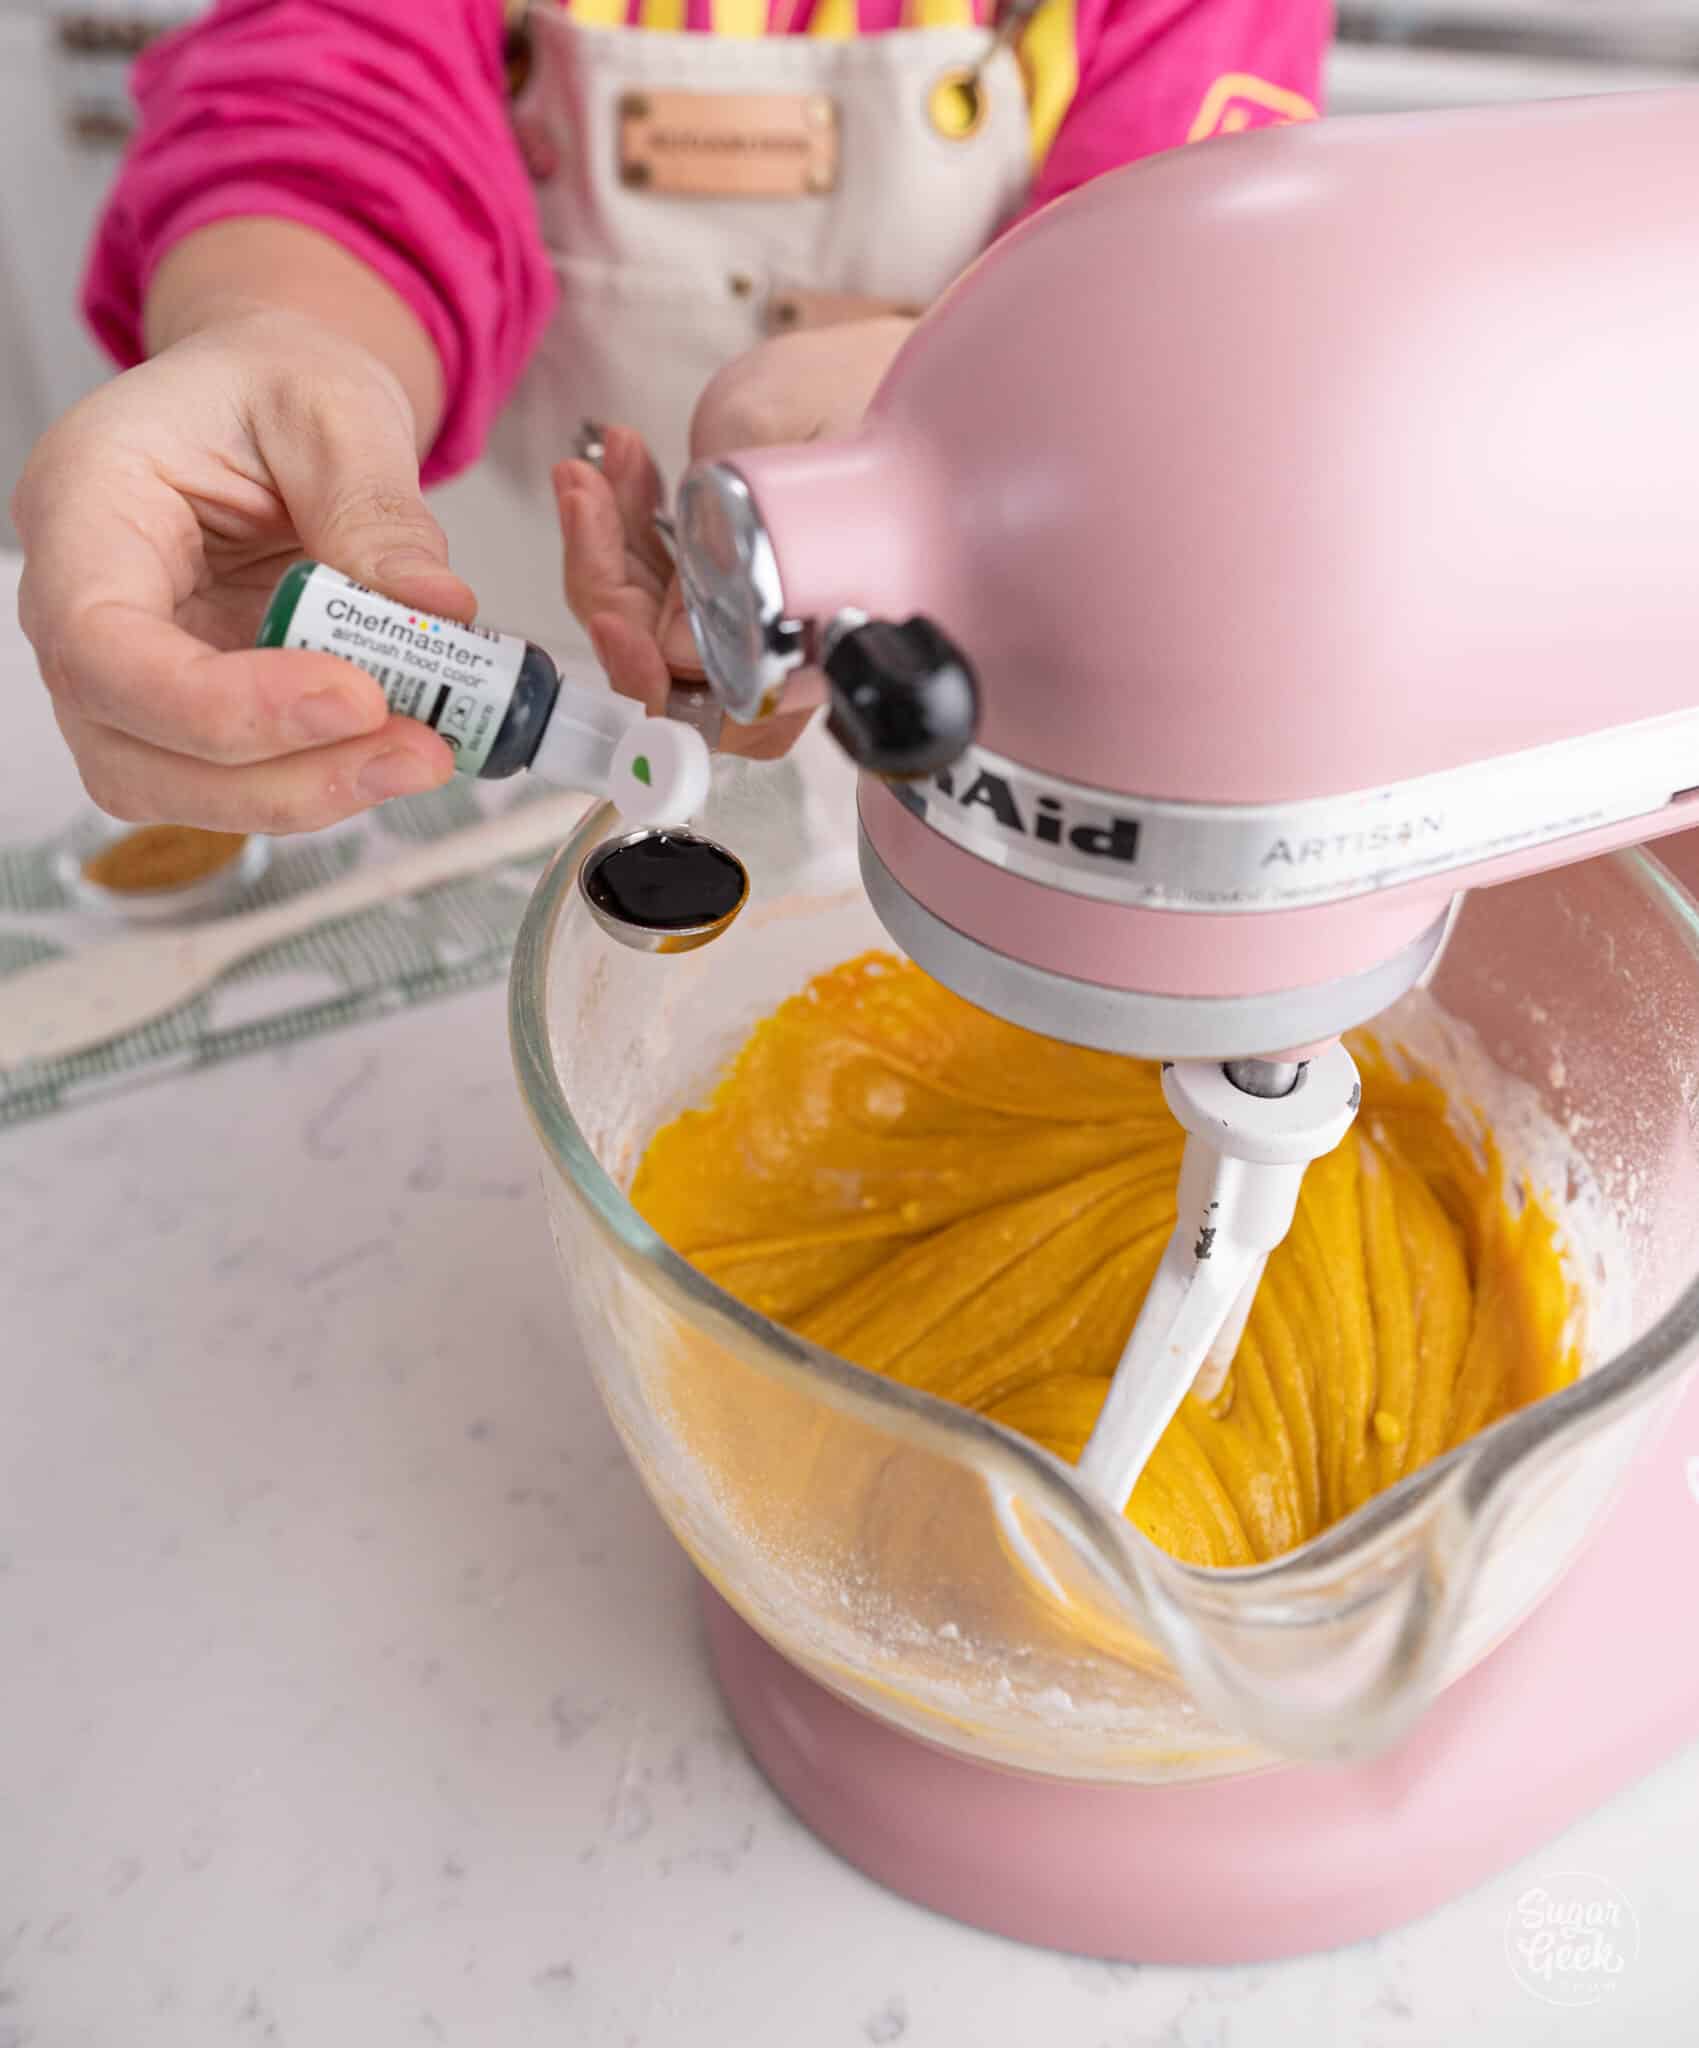 hand adding green food coloring to a stand mixer bowl